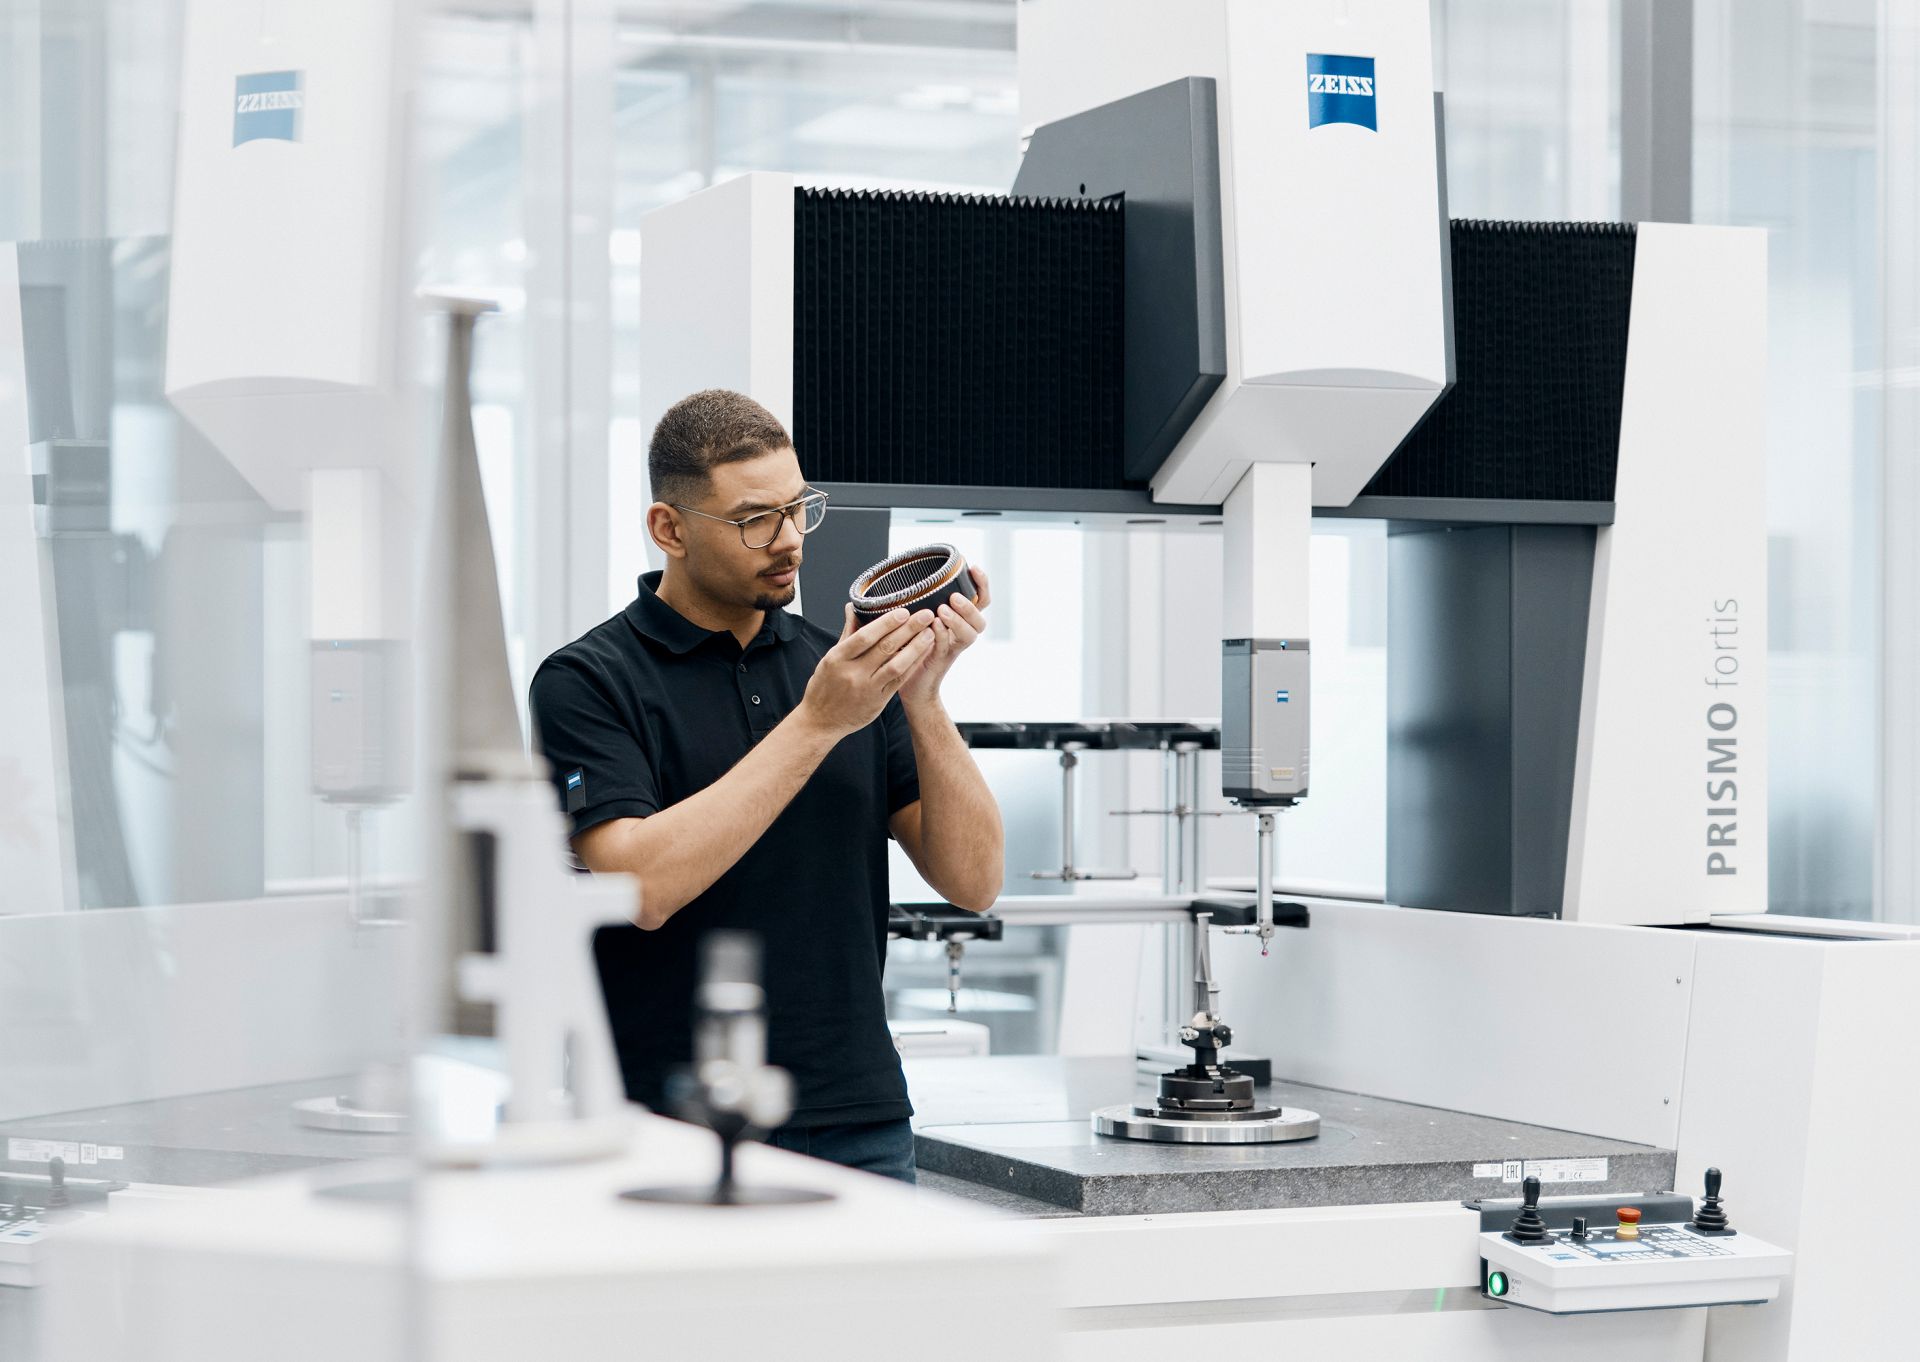 The new ZEISS PRISMO shines with many optimizations, such as sustainability and energy efficiency.